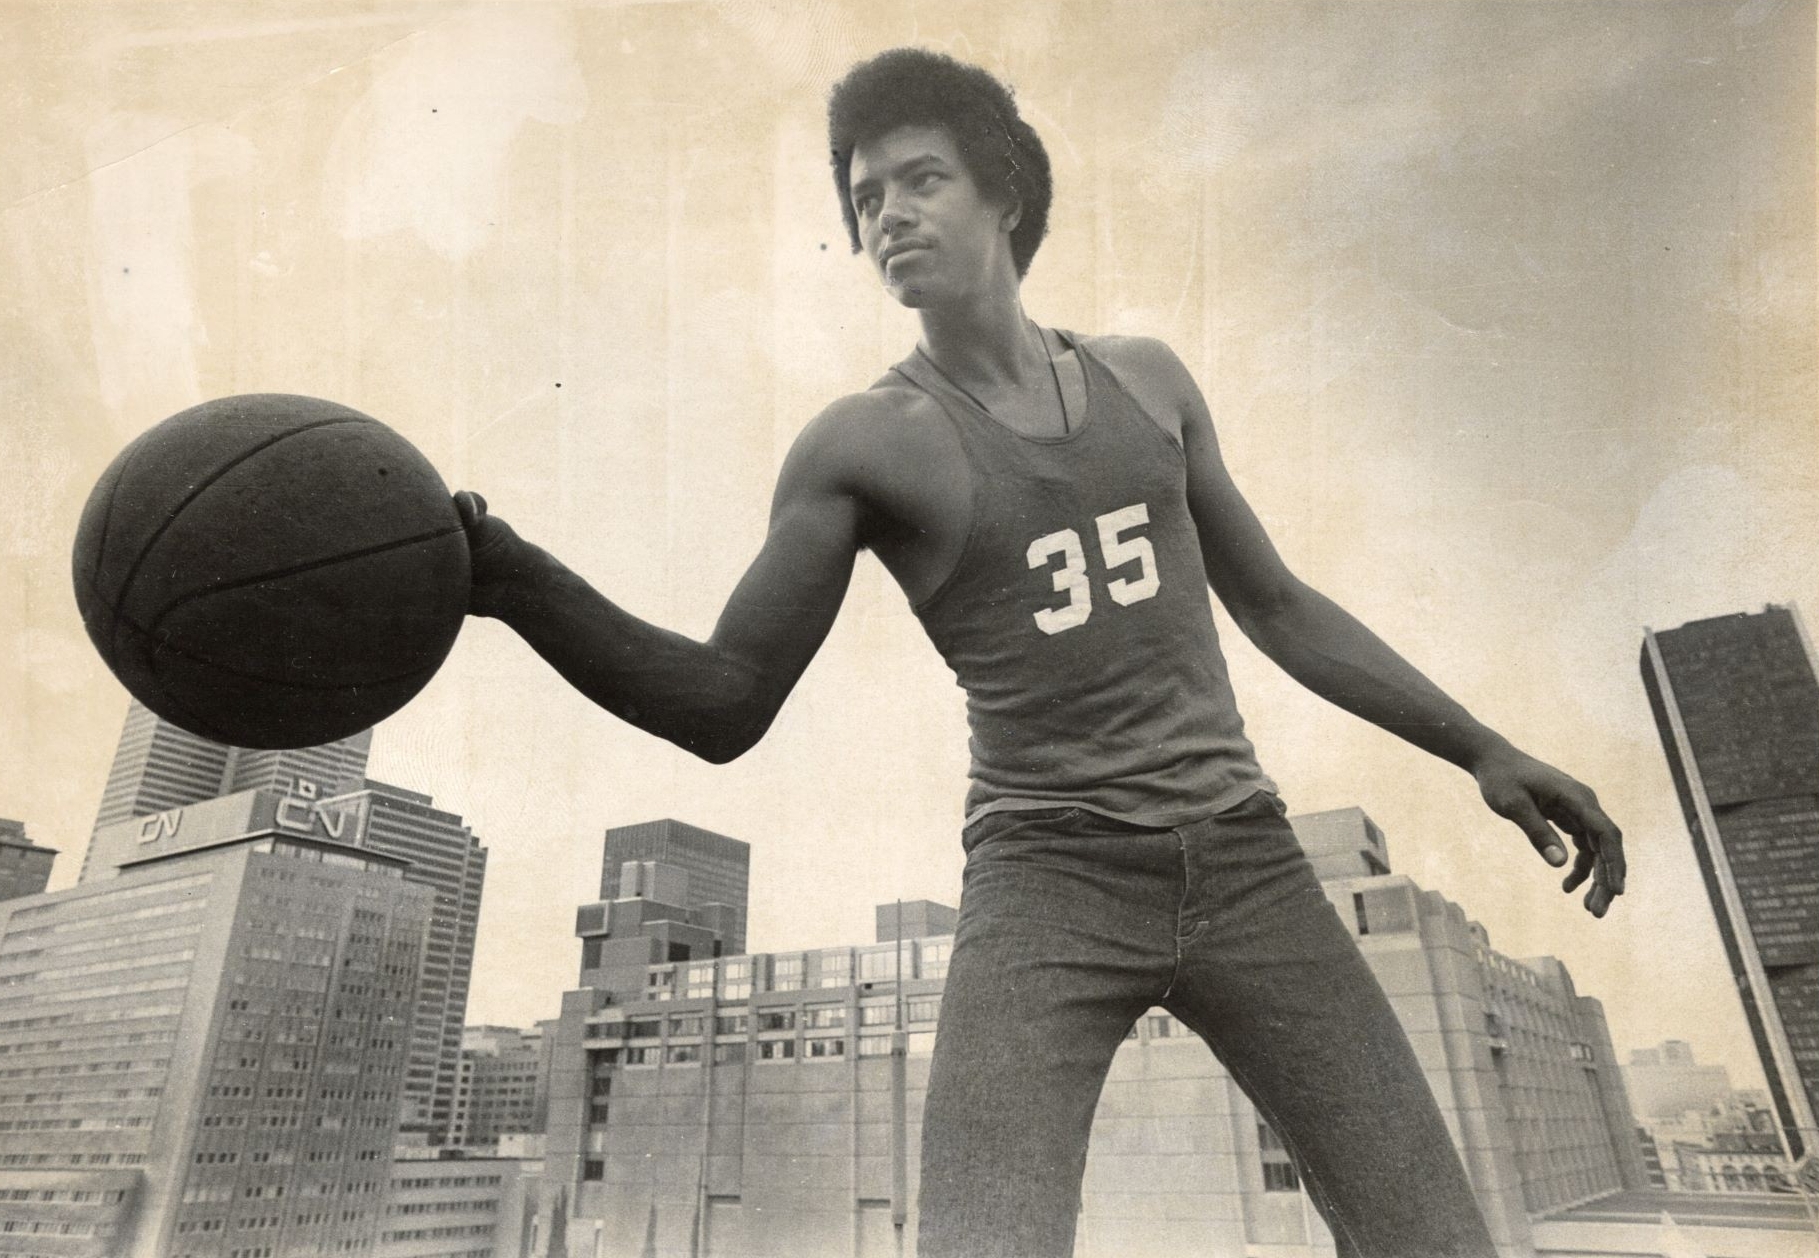 A vintage black and white photo of a young man holding a basketball with city skyscrapers in the background, evoking a sense of historical sports achievement.